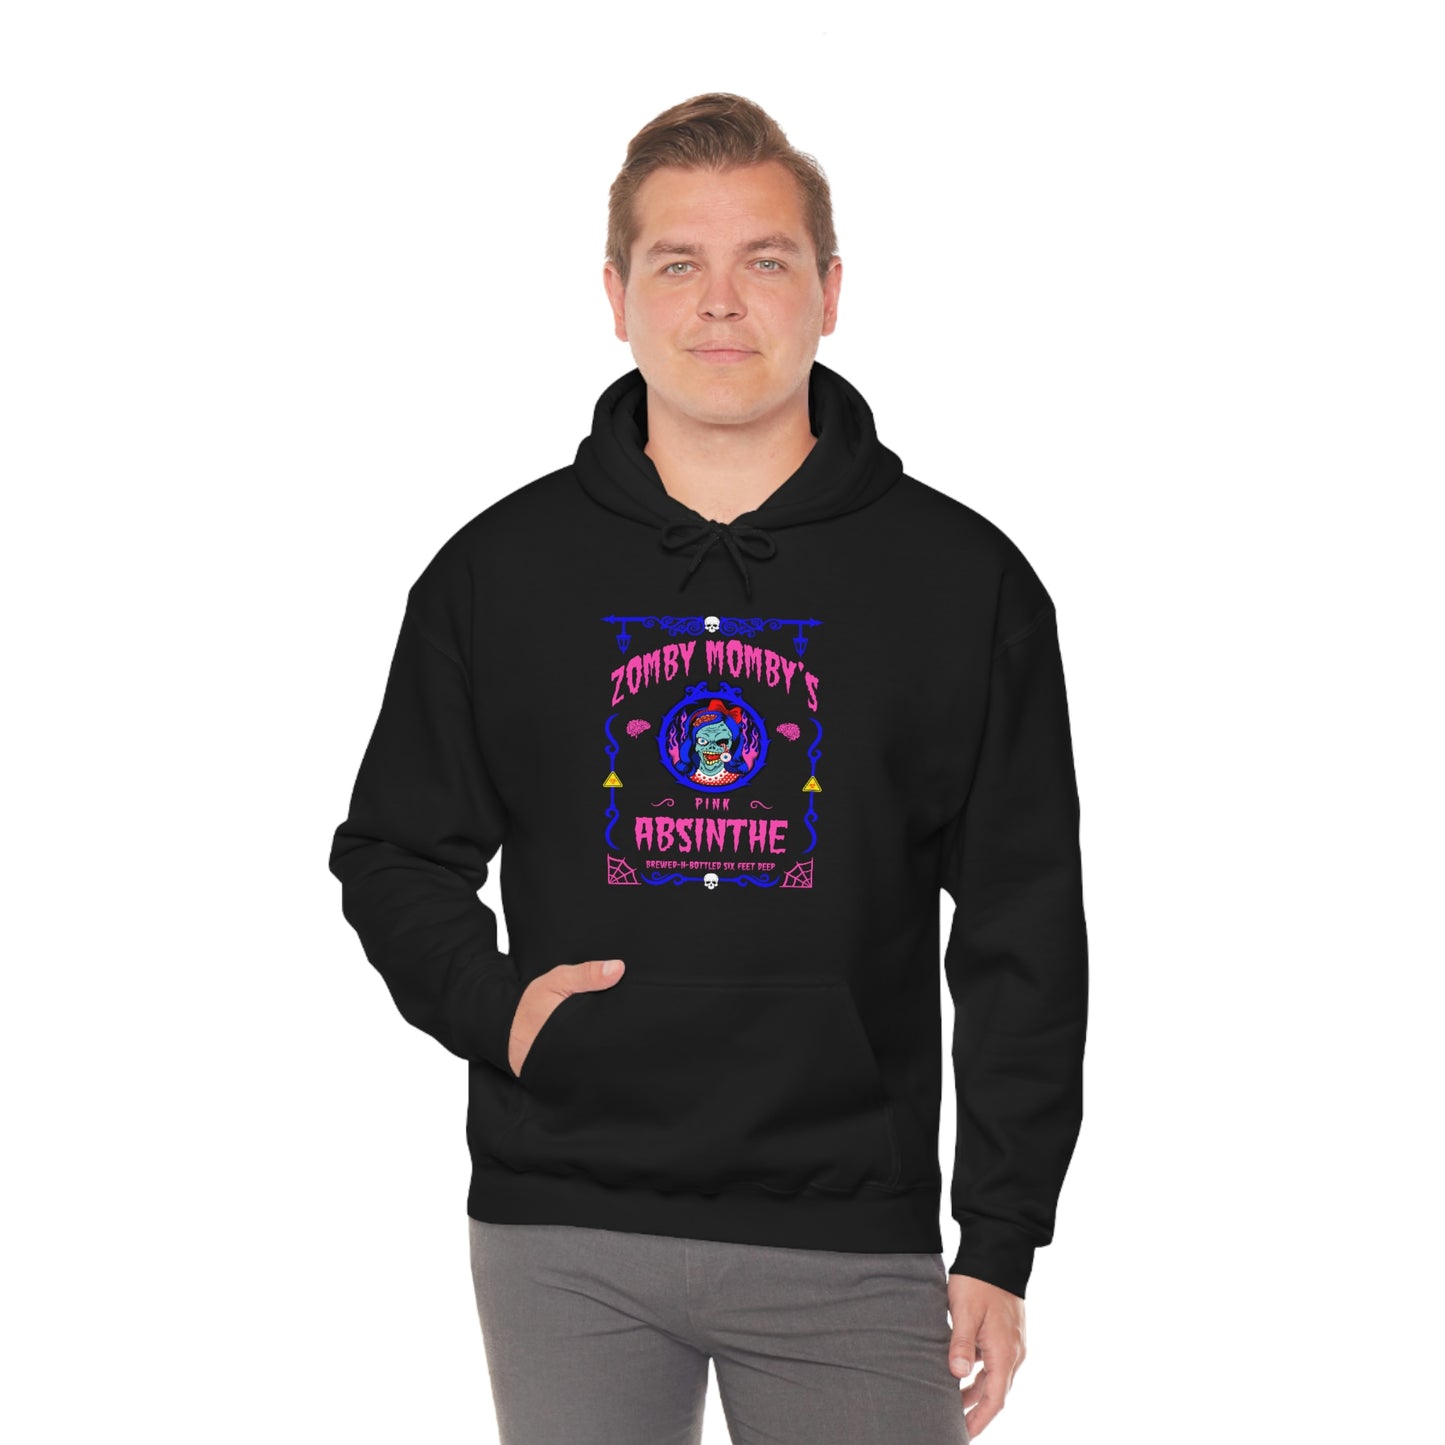 ABSINTHE MONSTERS 12 (ZOMBY MOMBY) Unisex Heavy Blend™ Hooded Sweatshirt